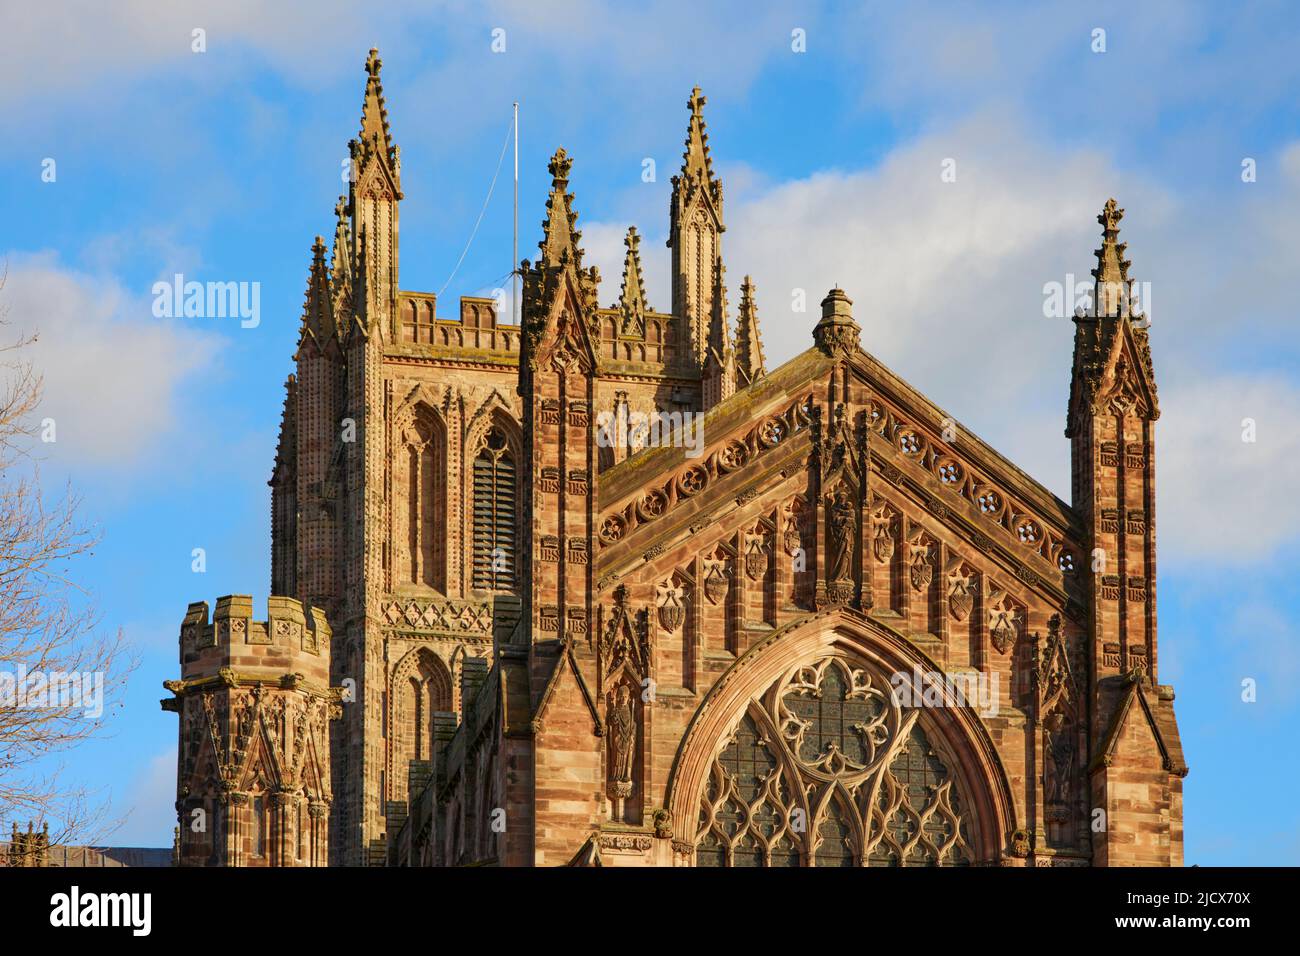 Hereford Cathedral, Hereford, Herefordshire, England, United Kingdom, Europe Stock Photo